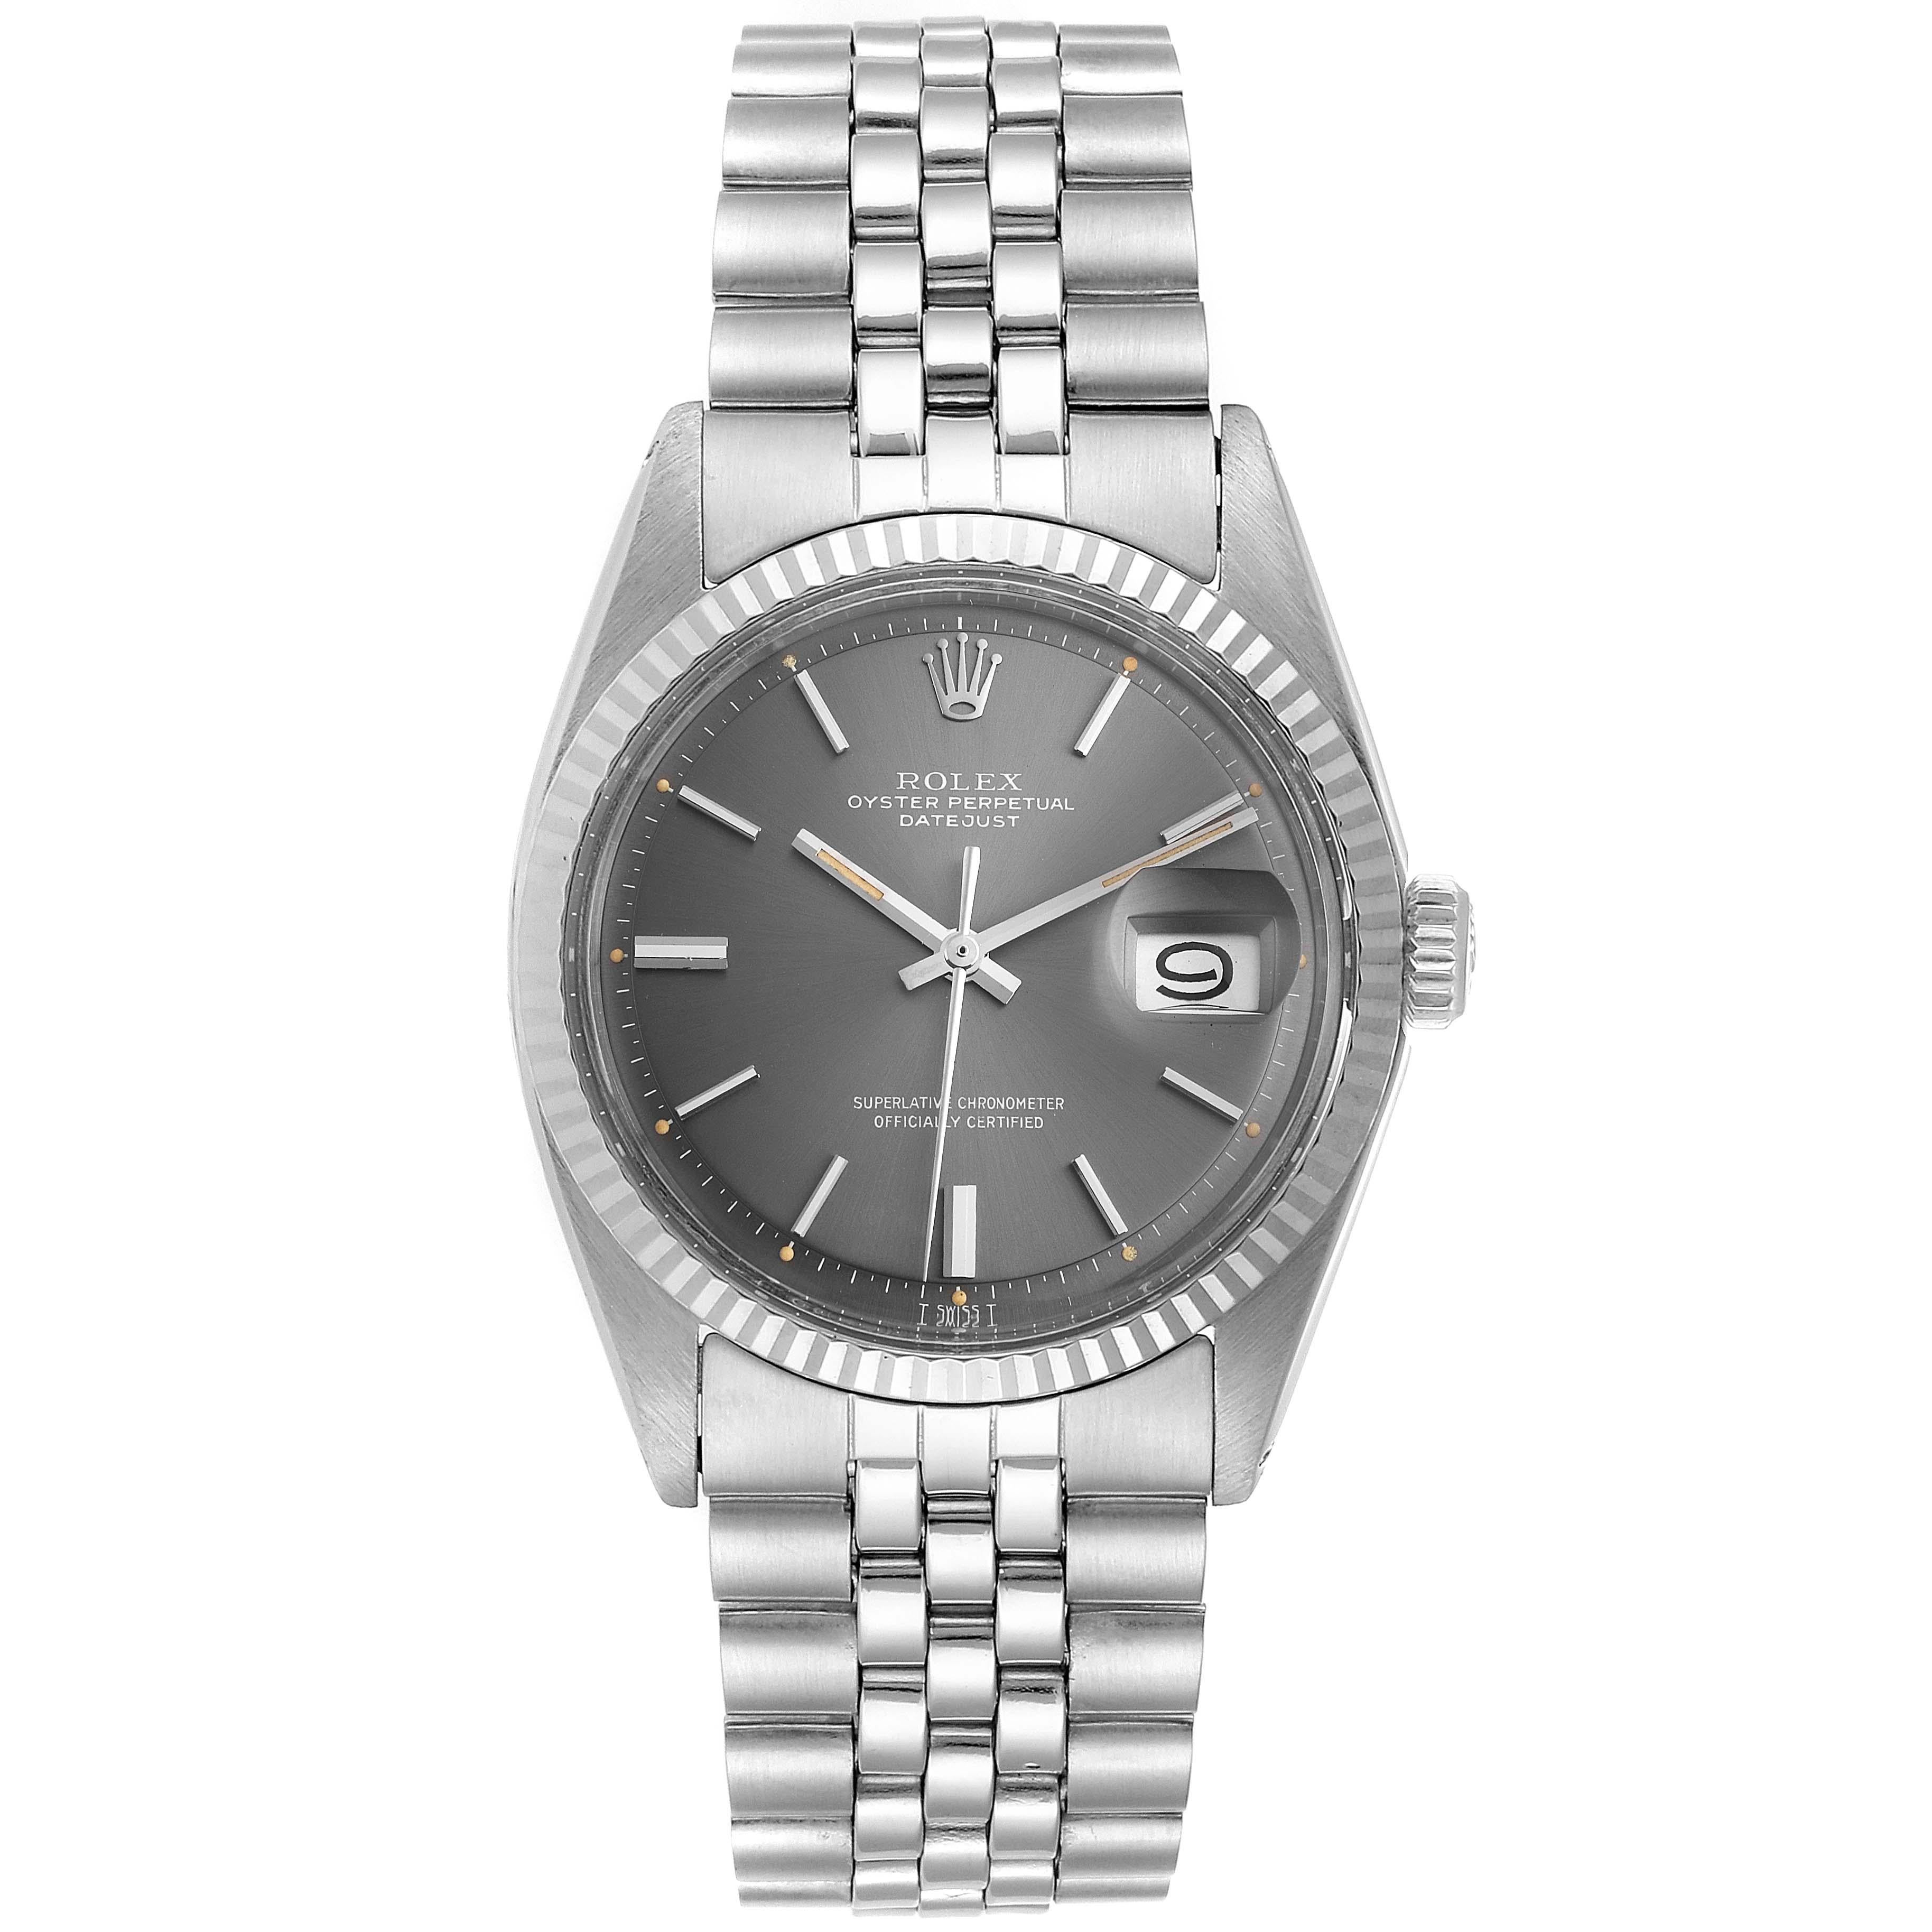 Rolex Datejust Steel White Gold Grey Dial Vintage Steel Watch 1601. Officially certified chronometer self-winding movement. Stainless steel oyster case 36 mm in diameter. Rolex logo on a crown. 18k white gold fluted bezel. Acrylic crystal with